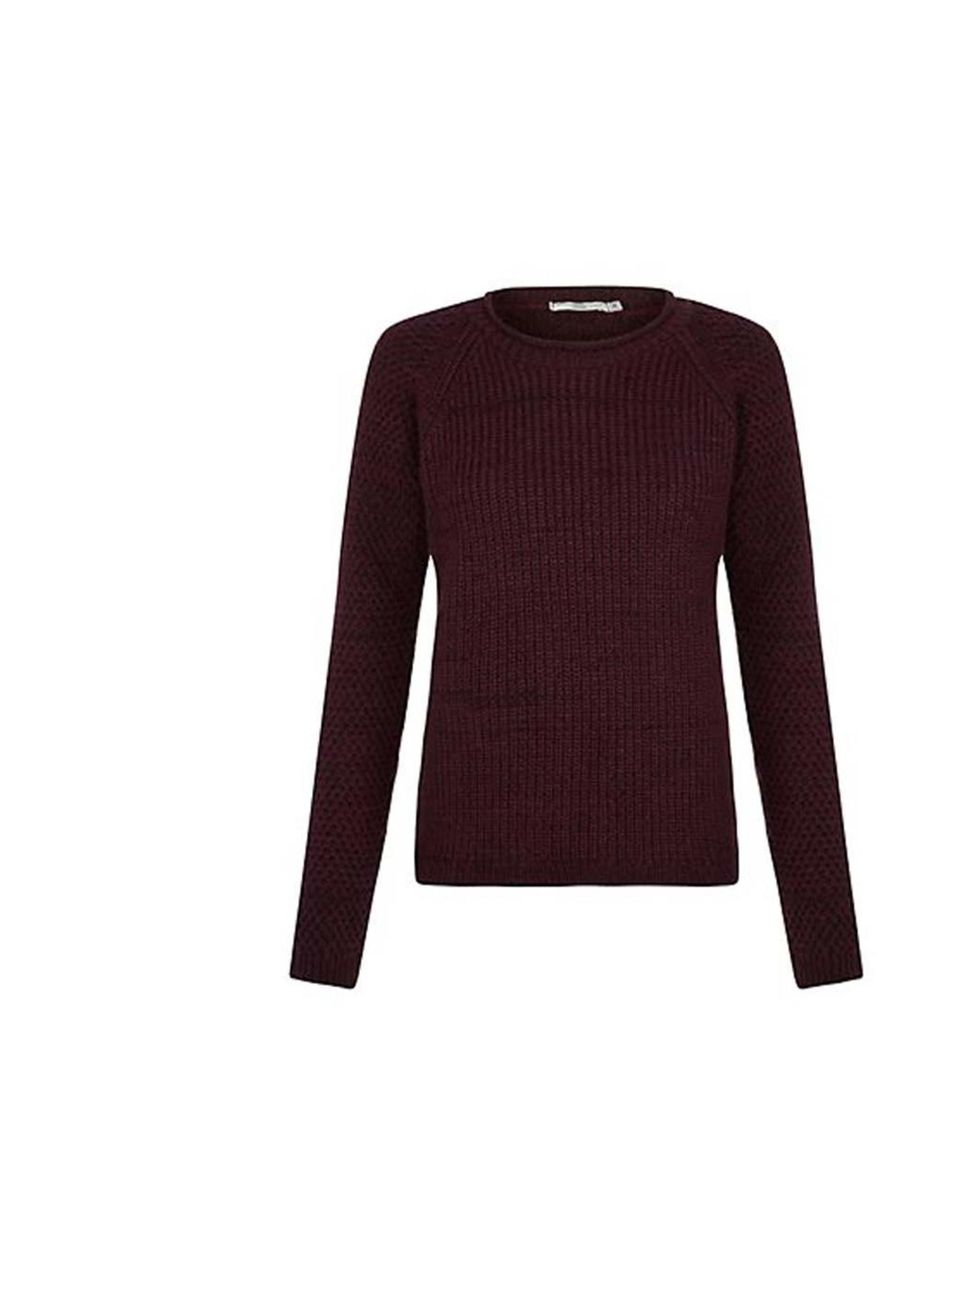 <p>Wear this chunky knit over a printed silk shirt - a mix of different textures makes for a great layered look. </p><p><a href="http://www.newlook.com/shop/womens/knitwear/burgundy-roll-neck-raglan-jumper-_291267067">New Look</a> jumper, £19.99</p>